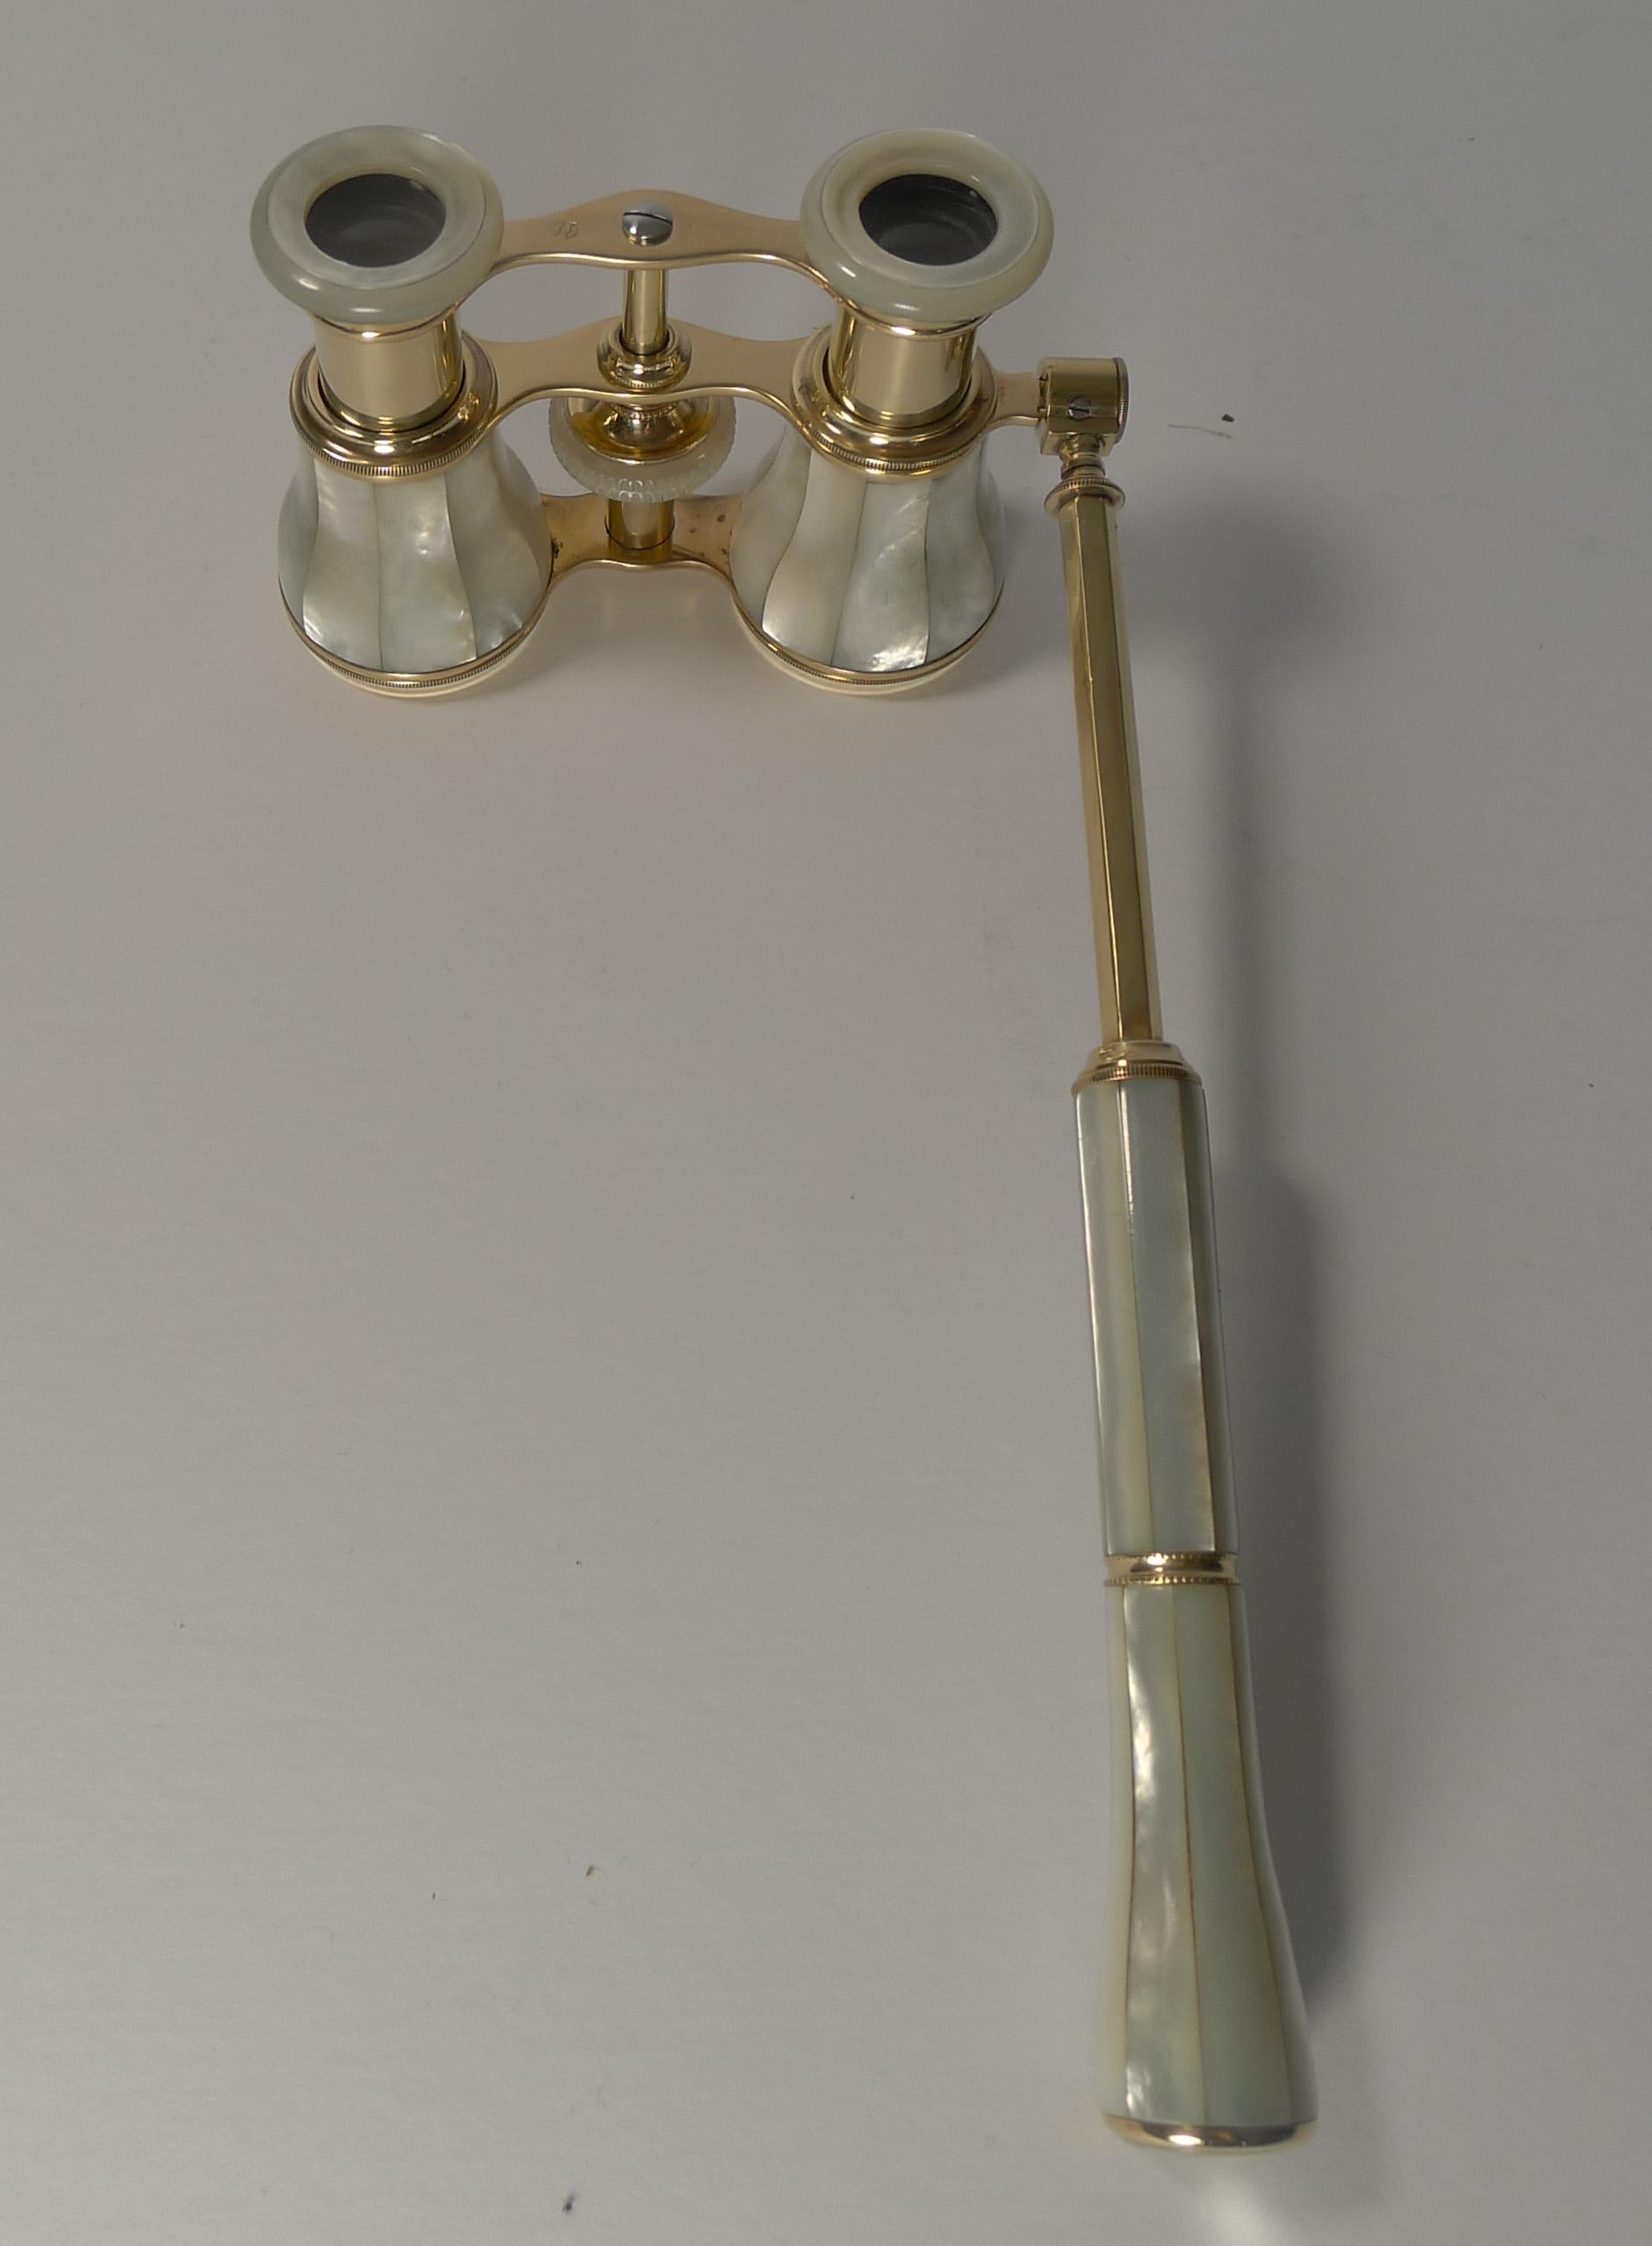 Brass Antique French Opera Glasses with Detachable Lorgnette Handle, circa 1900